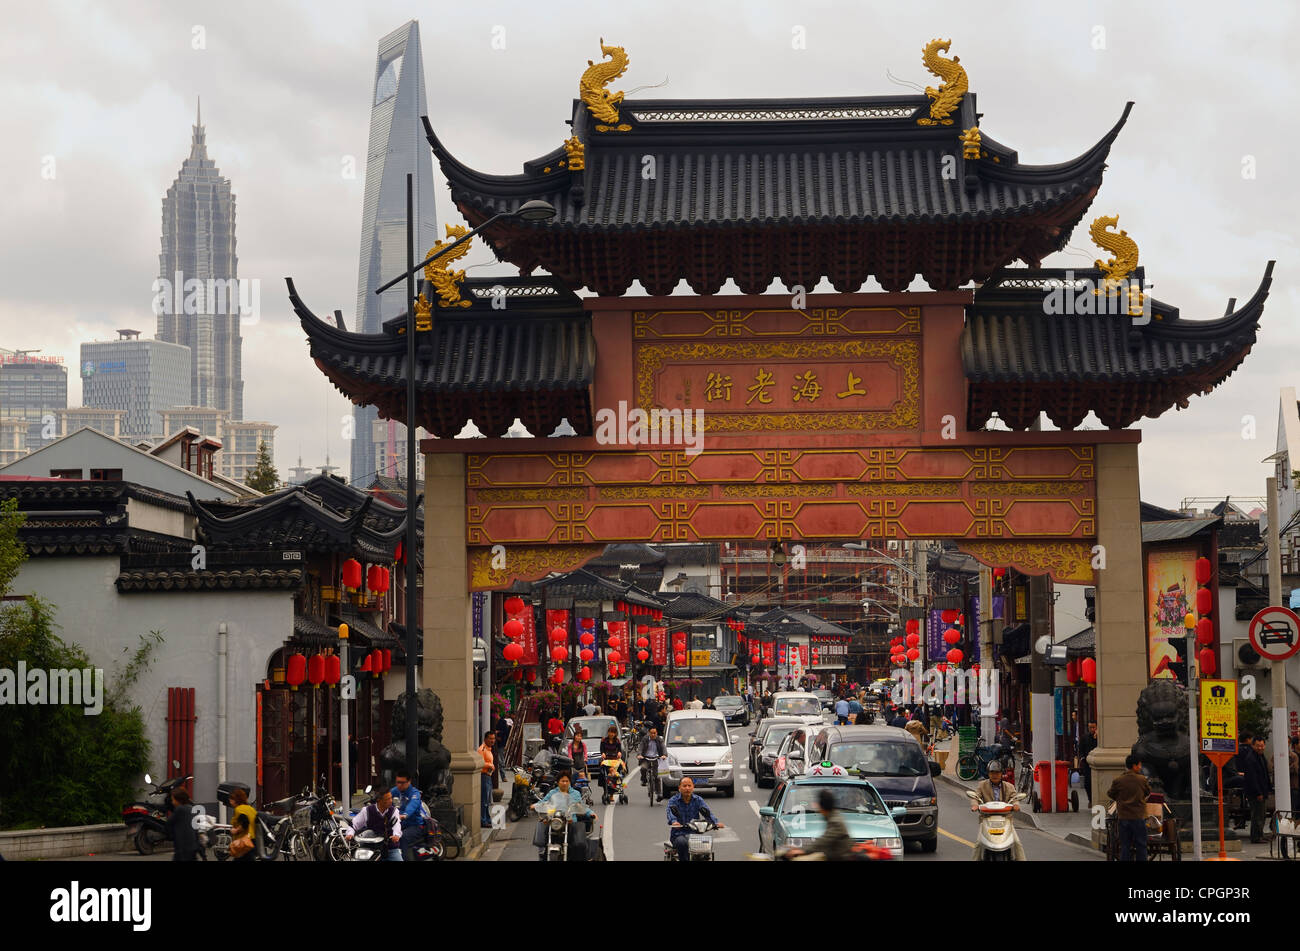 Fangbang traffic Old Town Gate from South Henan road Hangpu District Shanghai Peoples Republic of China Stock Photo